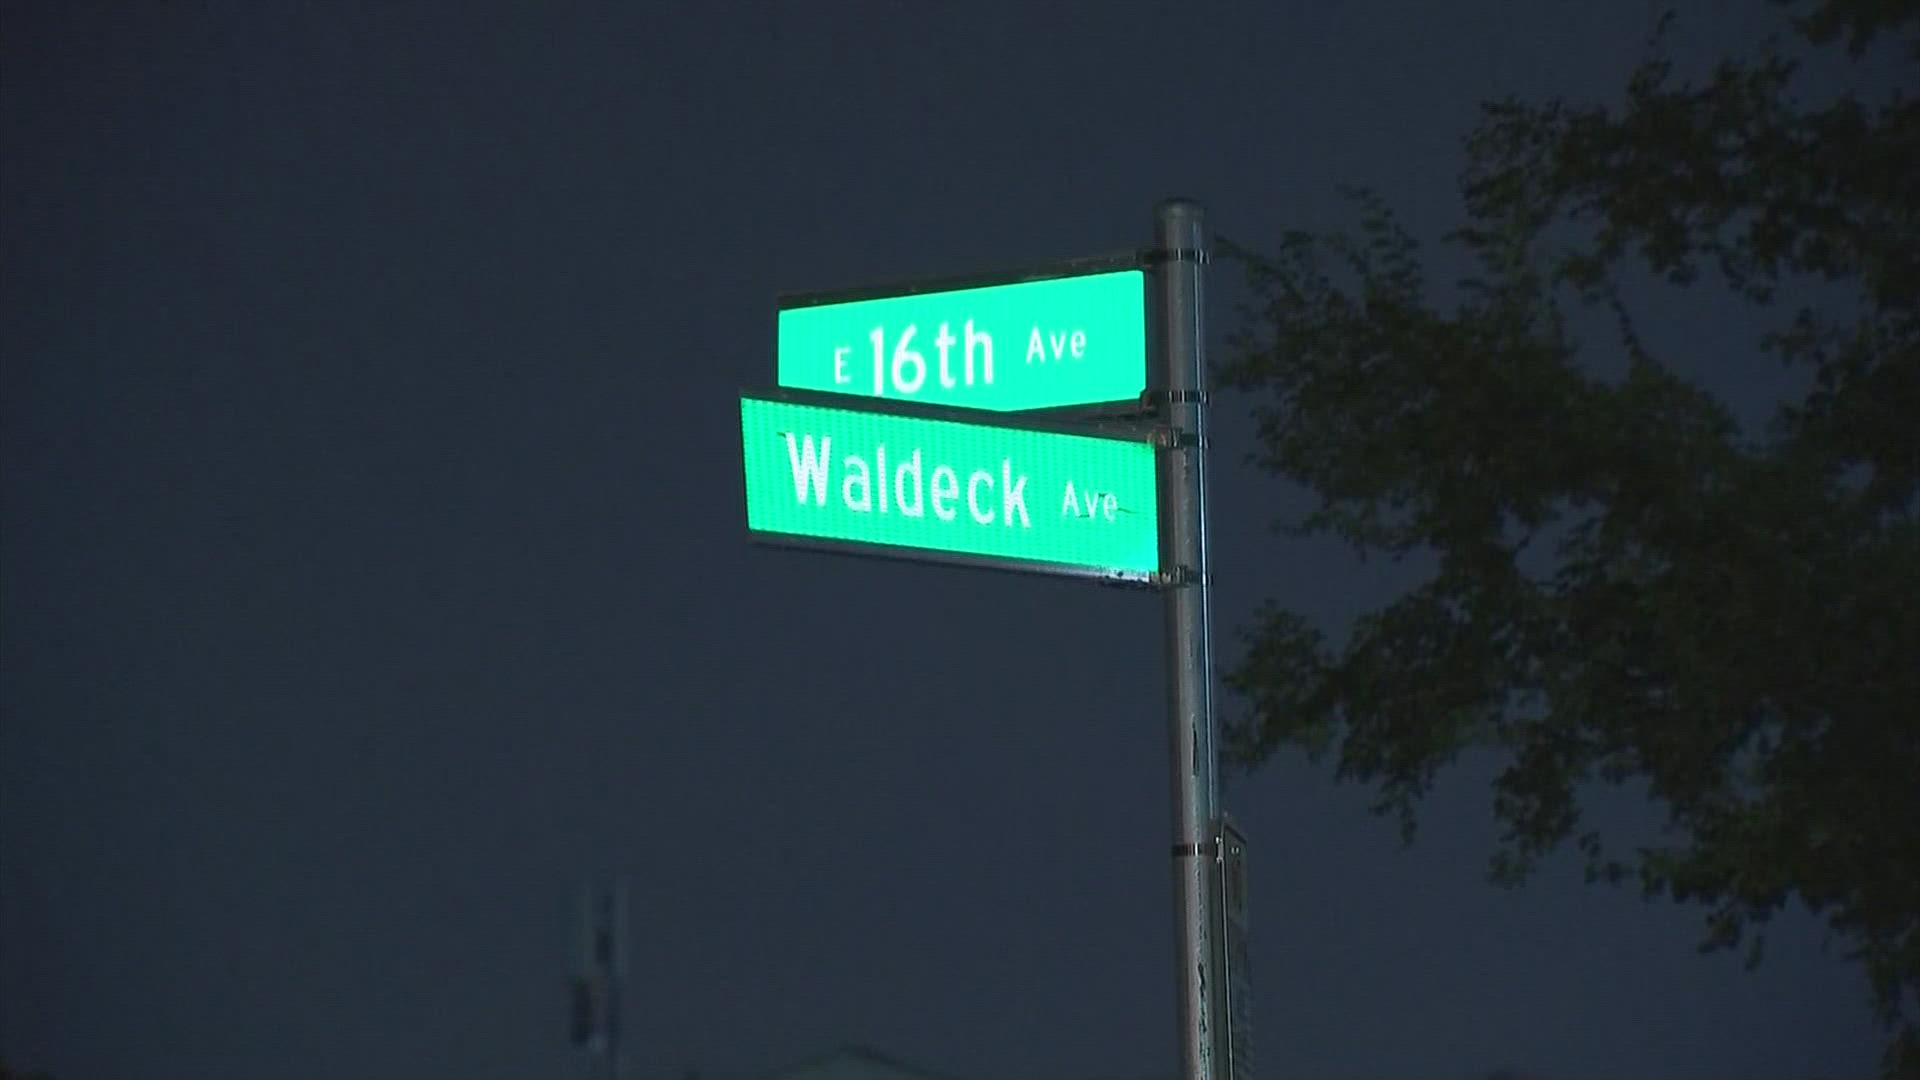 The robbery happened shortly after 1 a.m. in the area of East 16th Avenue and Waldeck Avenue, just east of Pearl Alley.